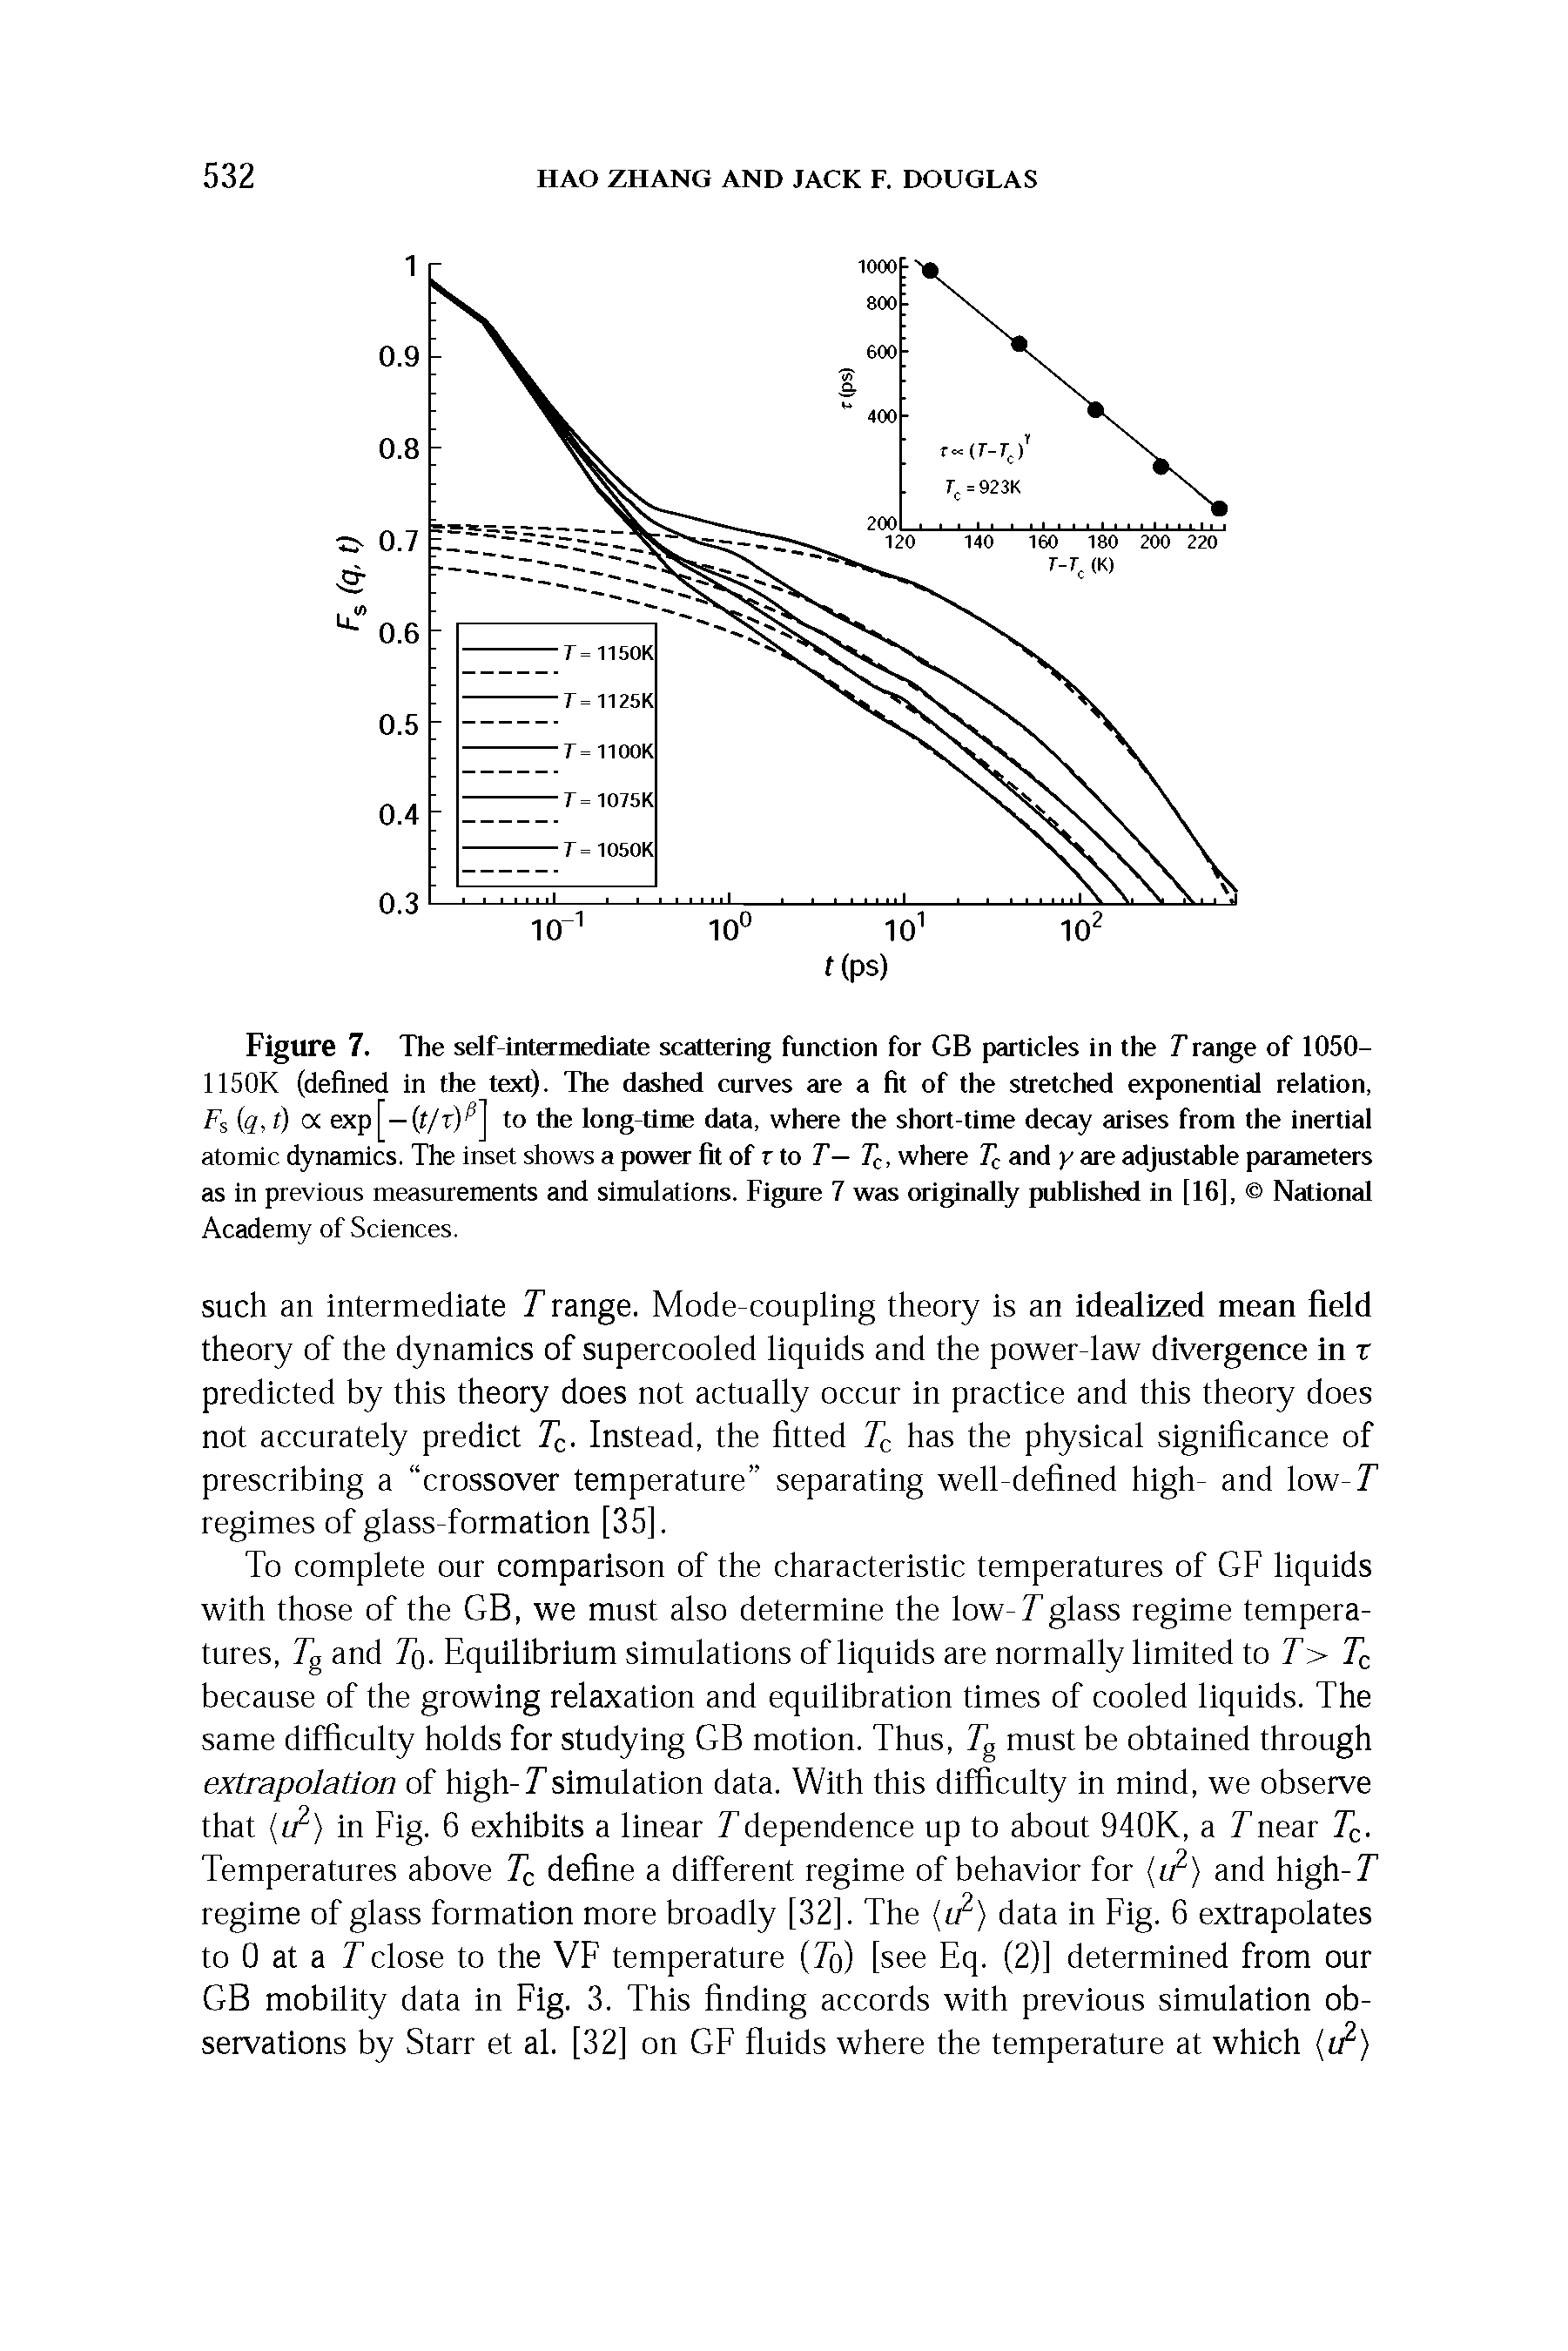 Figure 7. The self intermediate scattering function for GB particles in the T range of 1050-1150K (defined in the text). The dashed curves are a fit of the stretched exponential relation, Fs q, t) 0 exp[—(t/r) ] to the long-time data, where the short-time decay arises from the inertial atomic dynamics. The inset shows a power fit of r to 7"— 7, where Tq and y are adjustable parameters as in previous measurements and simulations. Figure 7 was originally published in [16], National Academy of Sciences.